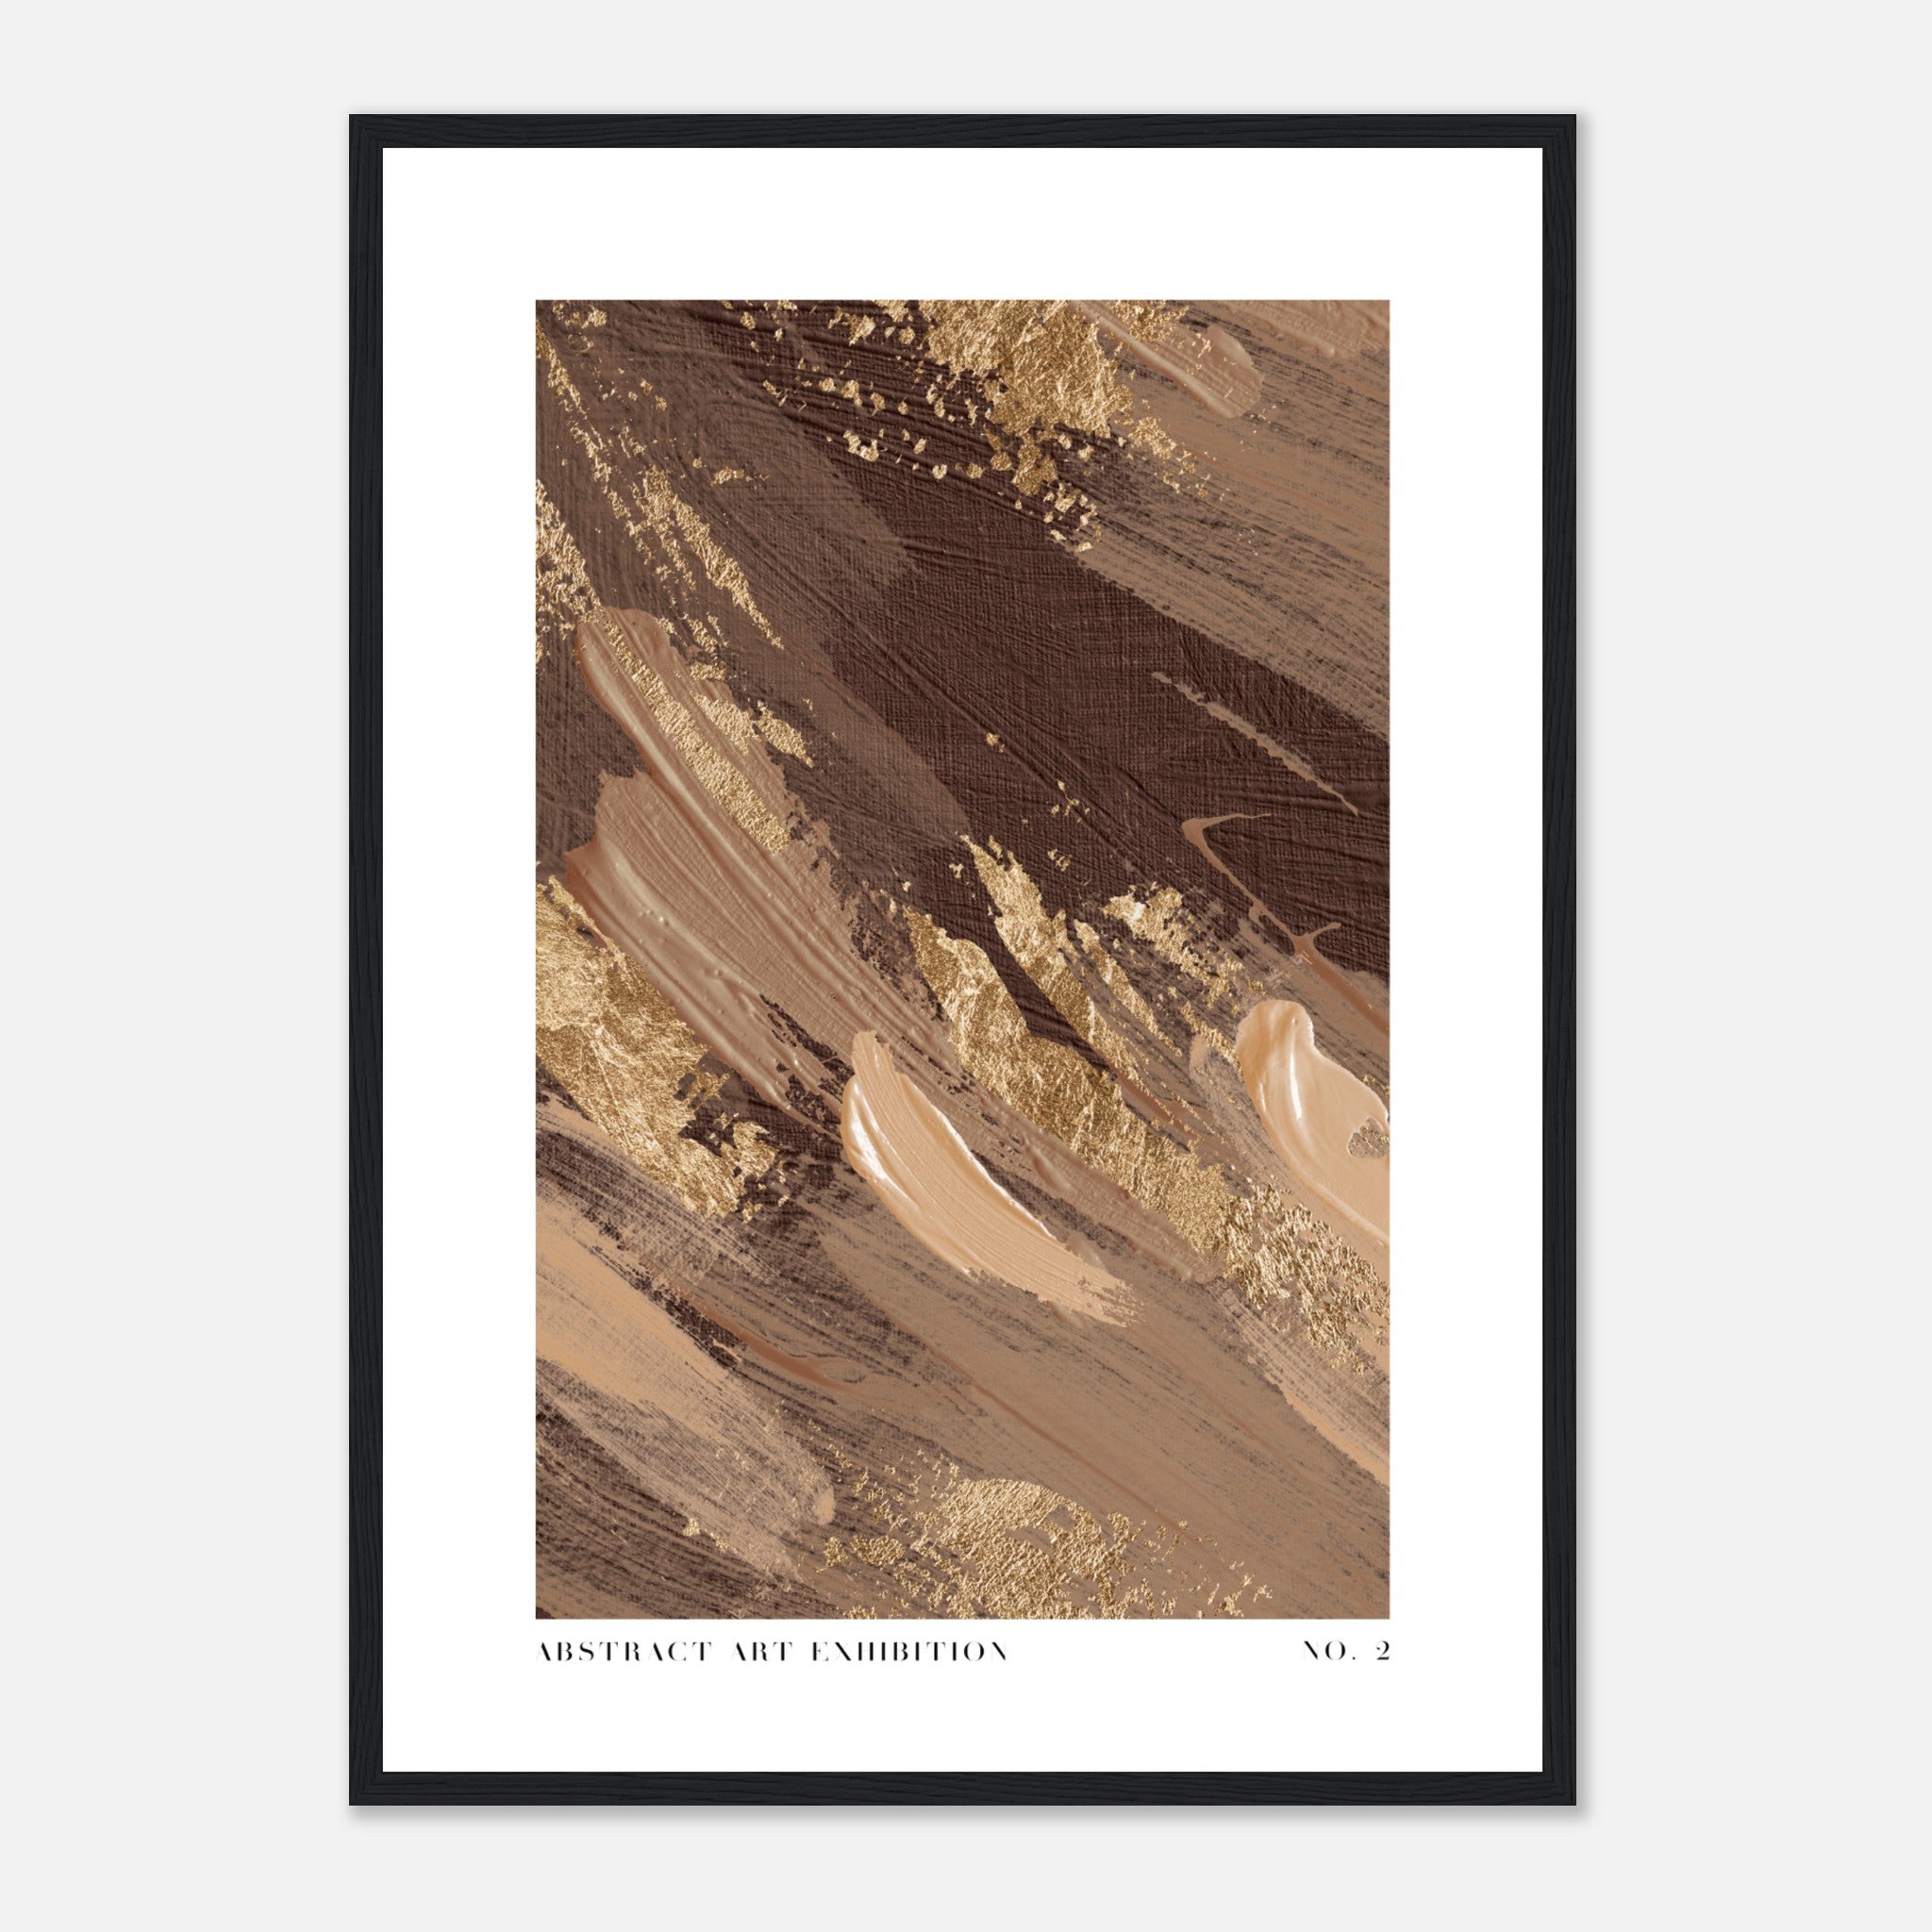 Browns - Abstract Art Exhibition No. 2 Poster